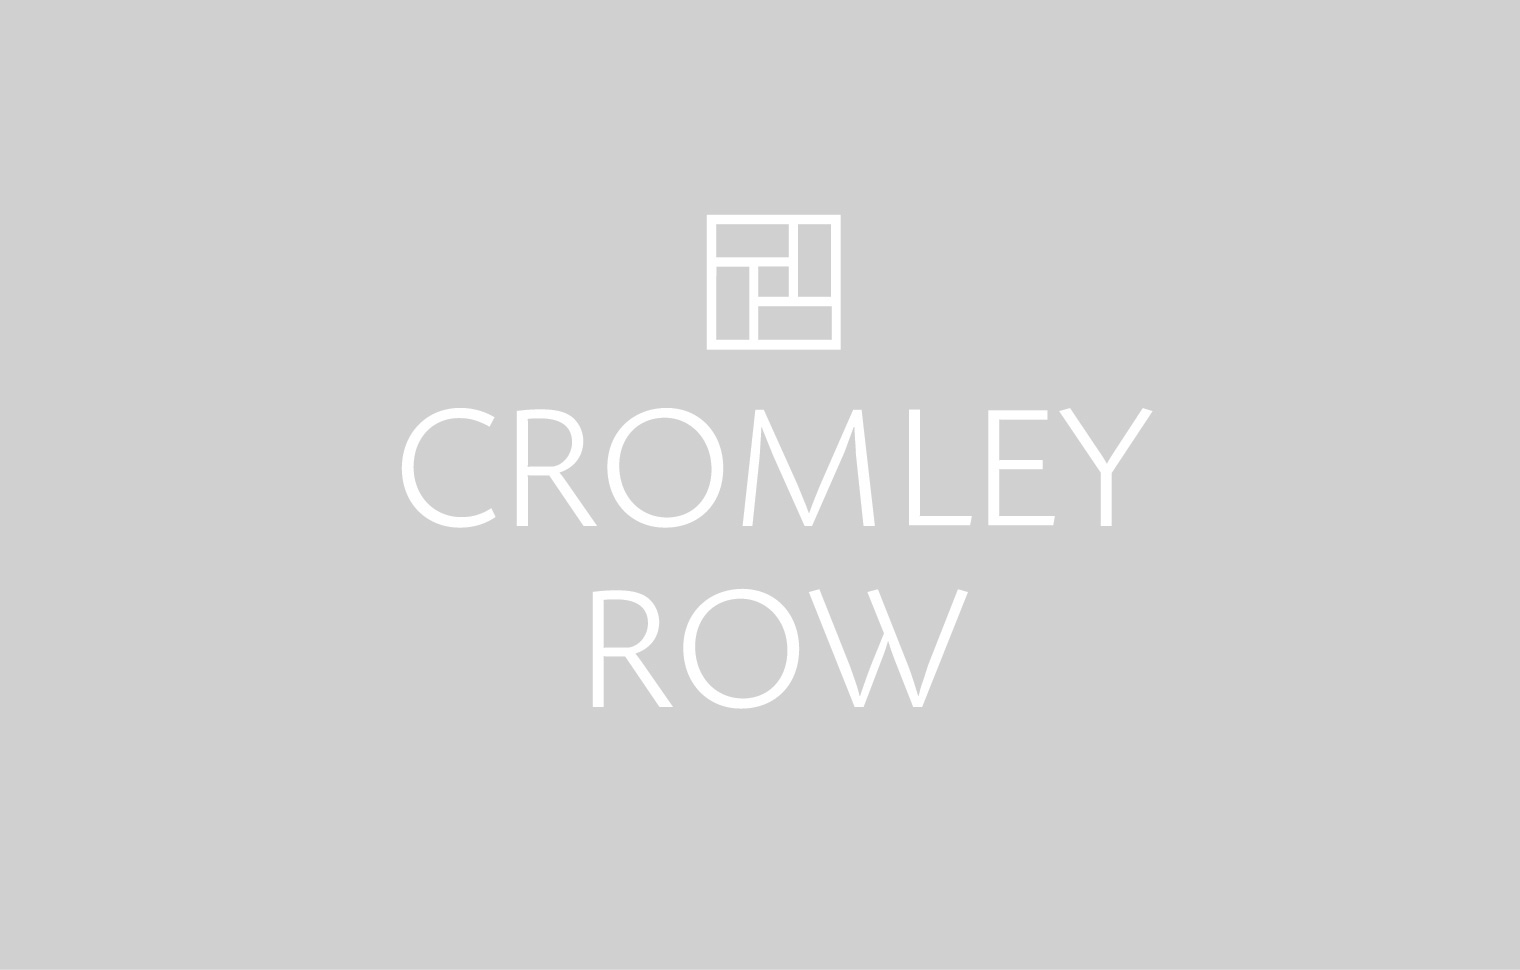 The logo has rectangles placed clockwise forming a square with the words “Cromley Row” stacked in a sans-serif typeface.